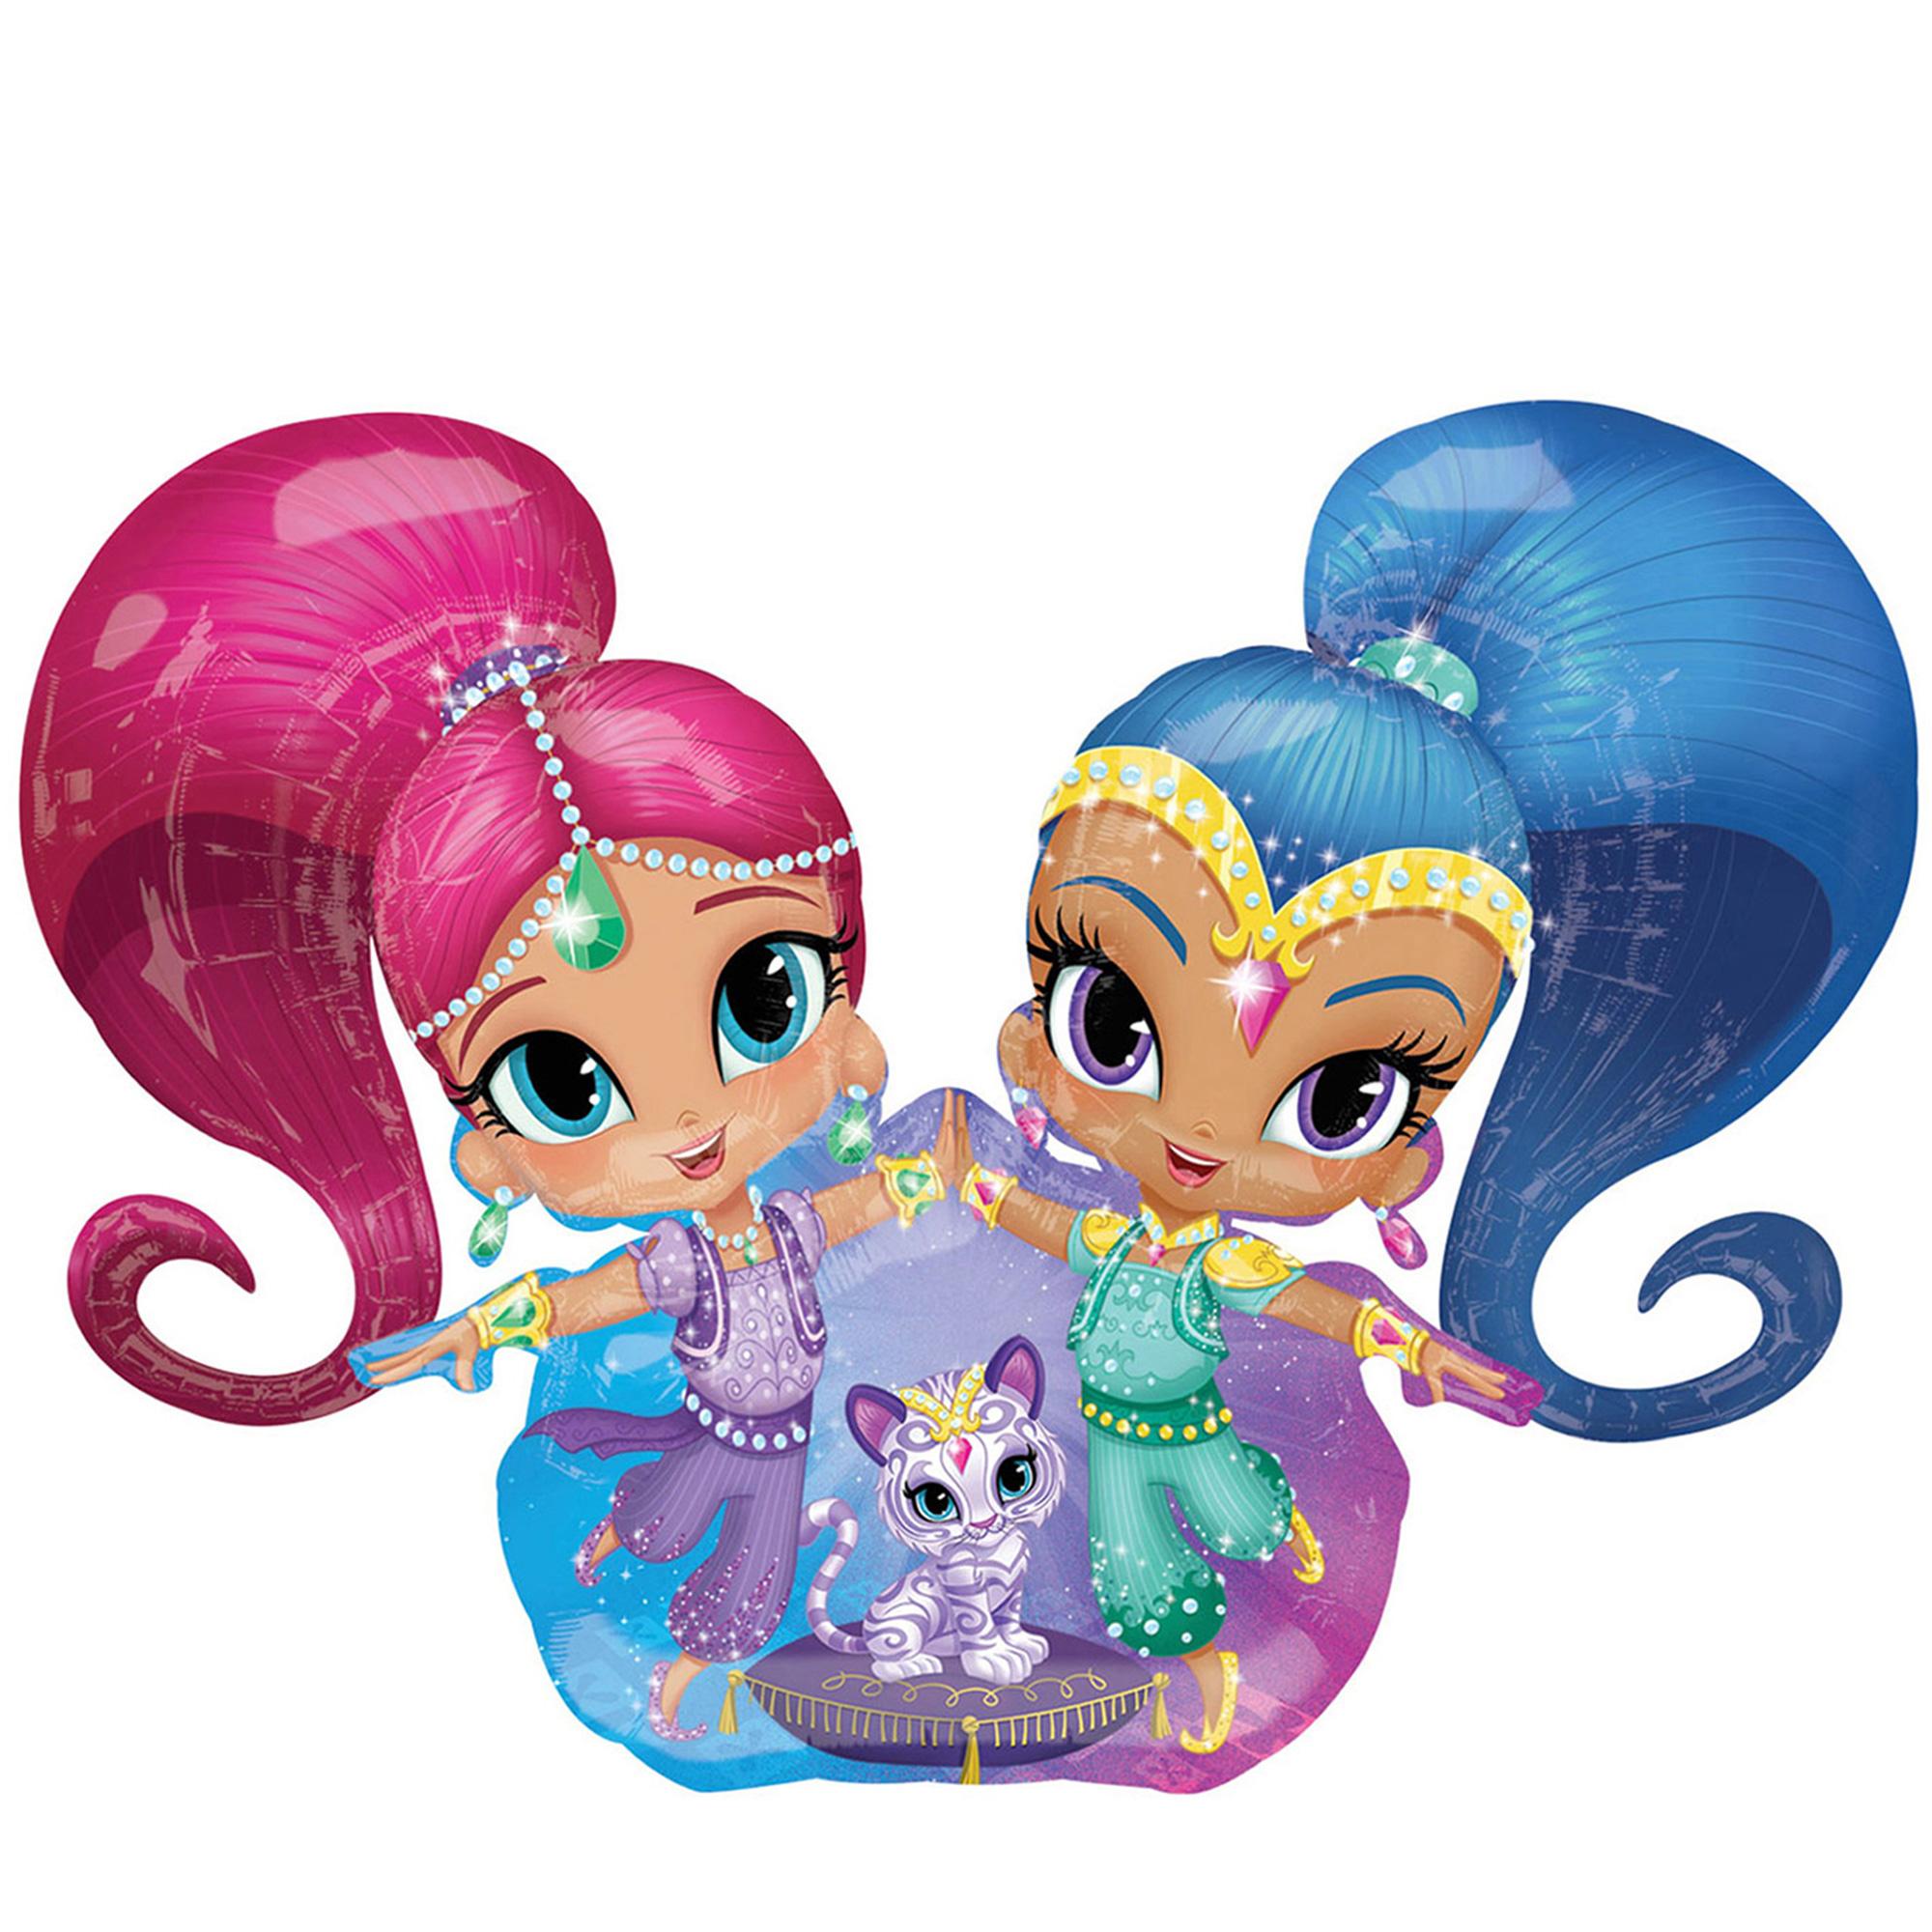 Shimmer and Shine Airwalker Balloon 53x44in Balloons & Streamers - Party Centre